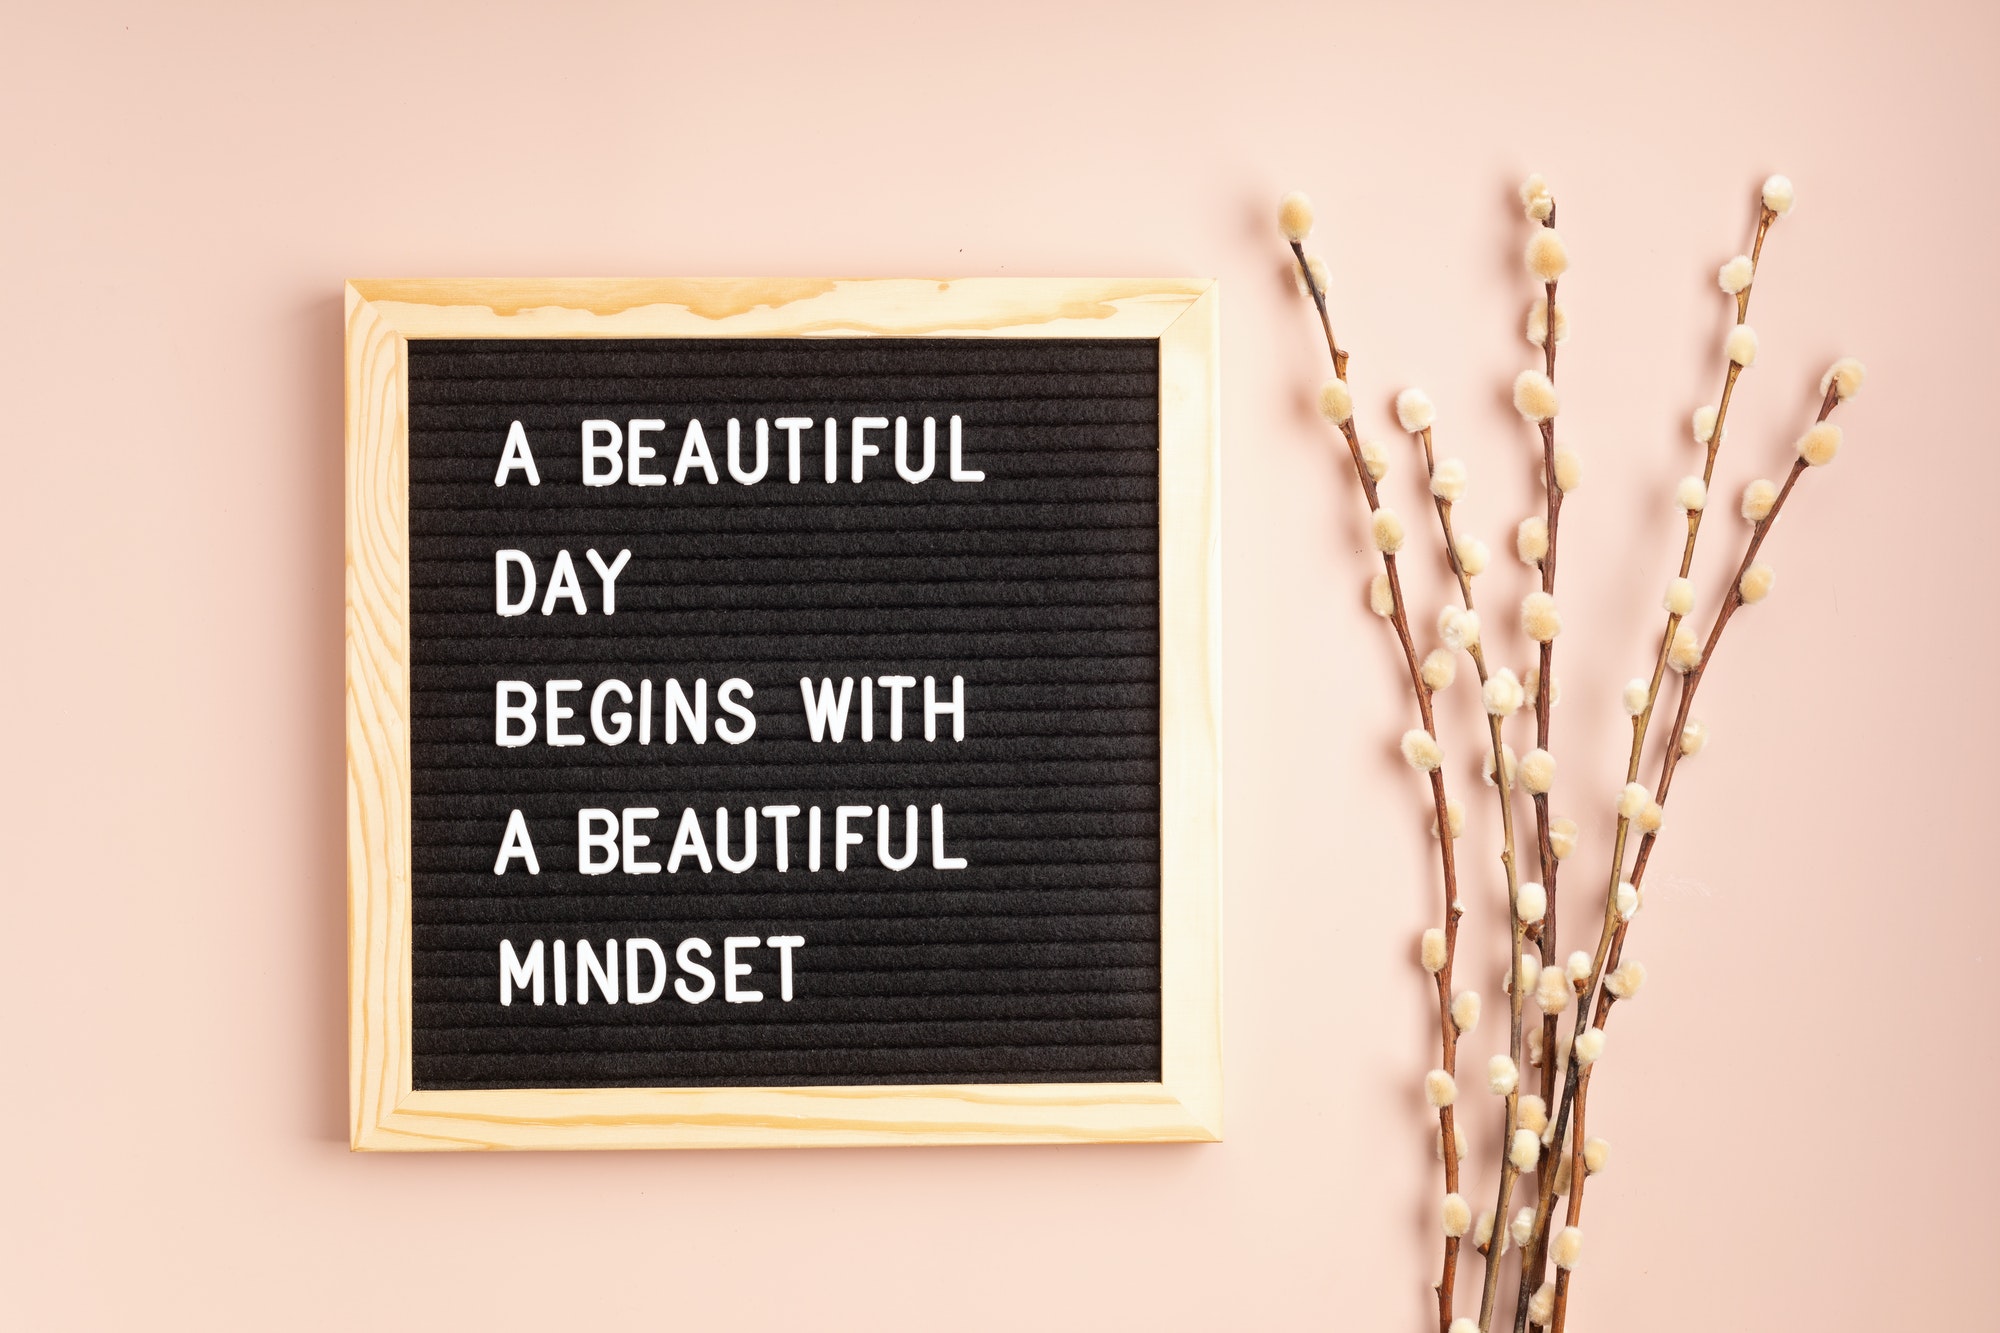 Felt letter board with text beautiful day begins with beautiful mindset. Mental health idea